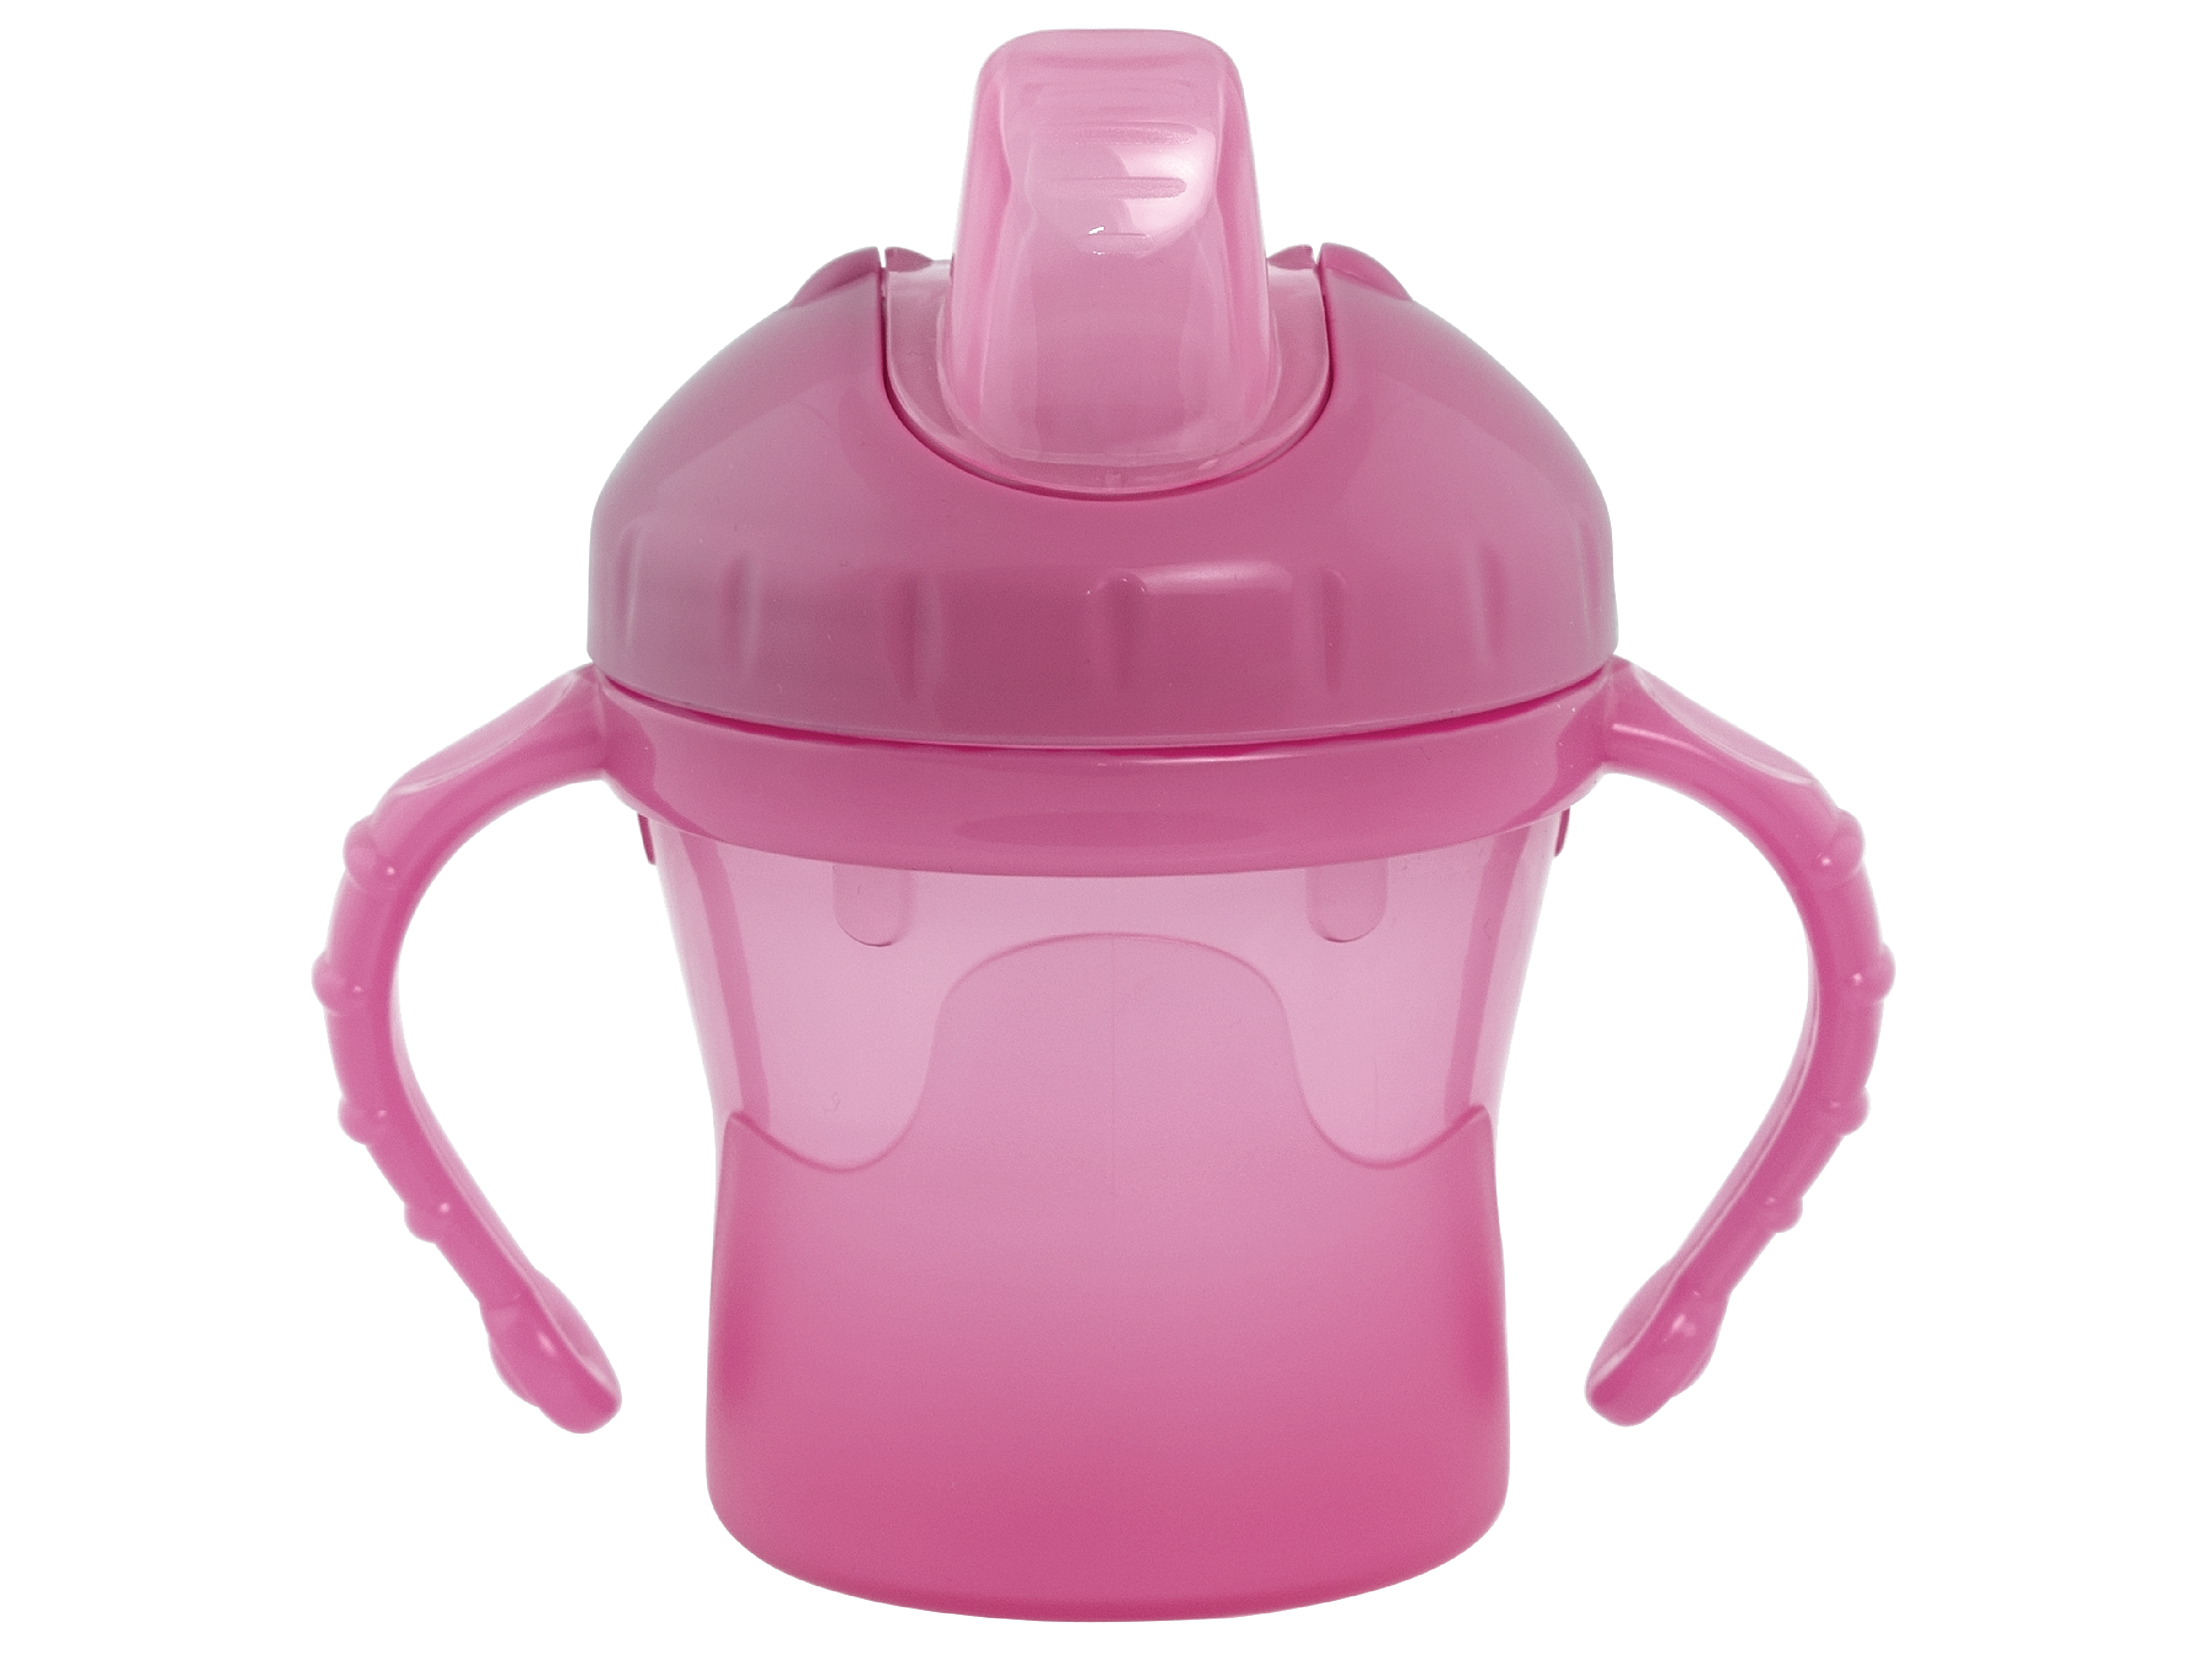 Bambino Easy Sip Cup, Rosa, 1 stk.